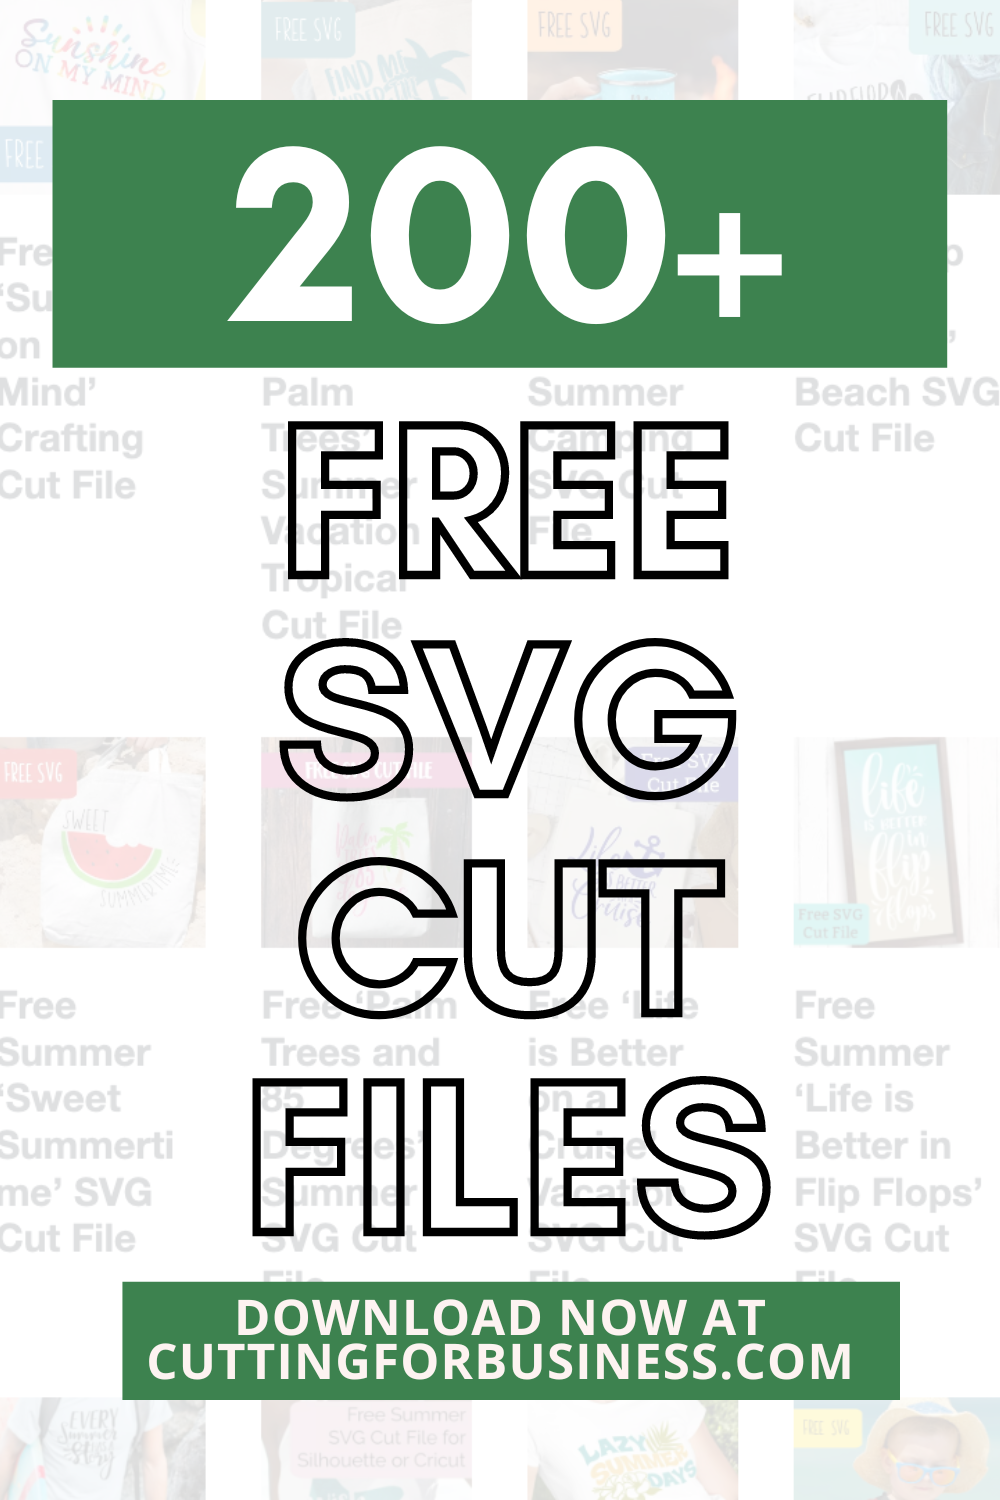 200+ Free Commercial Use Cut Files for Silhouette, Cricut, Glowforge, xTool, Juliet, and more - cuttingforbusiness.com.